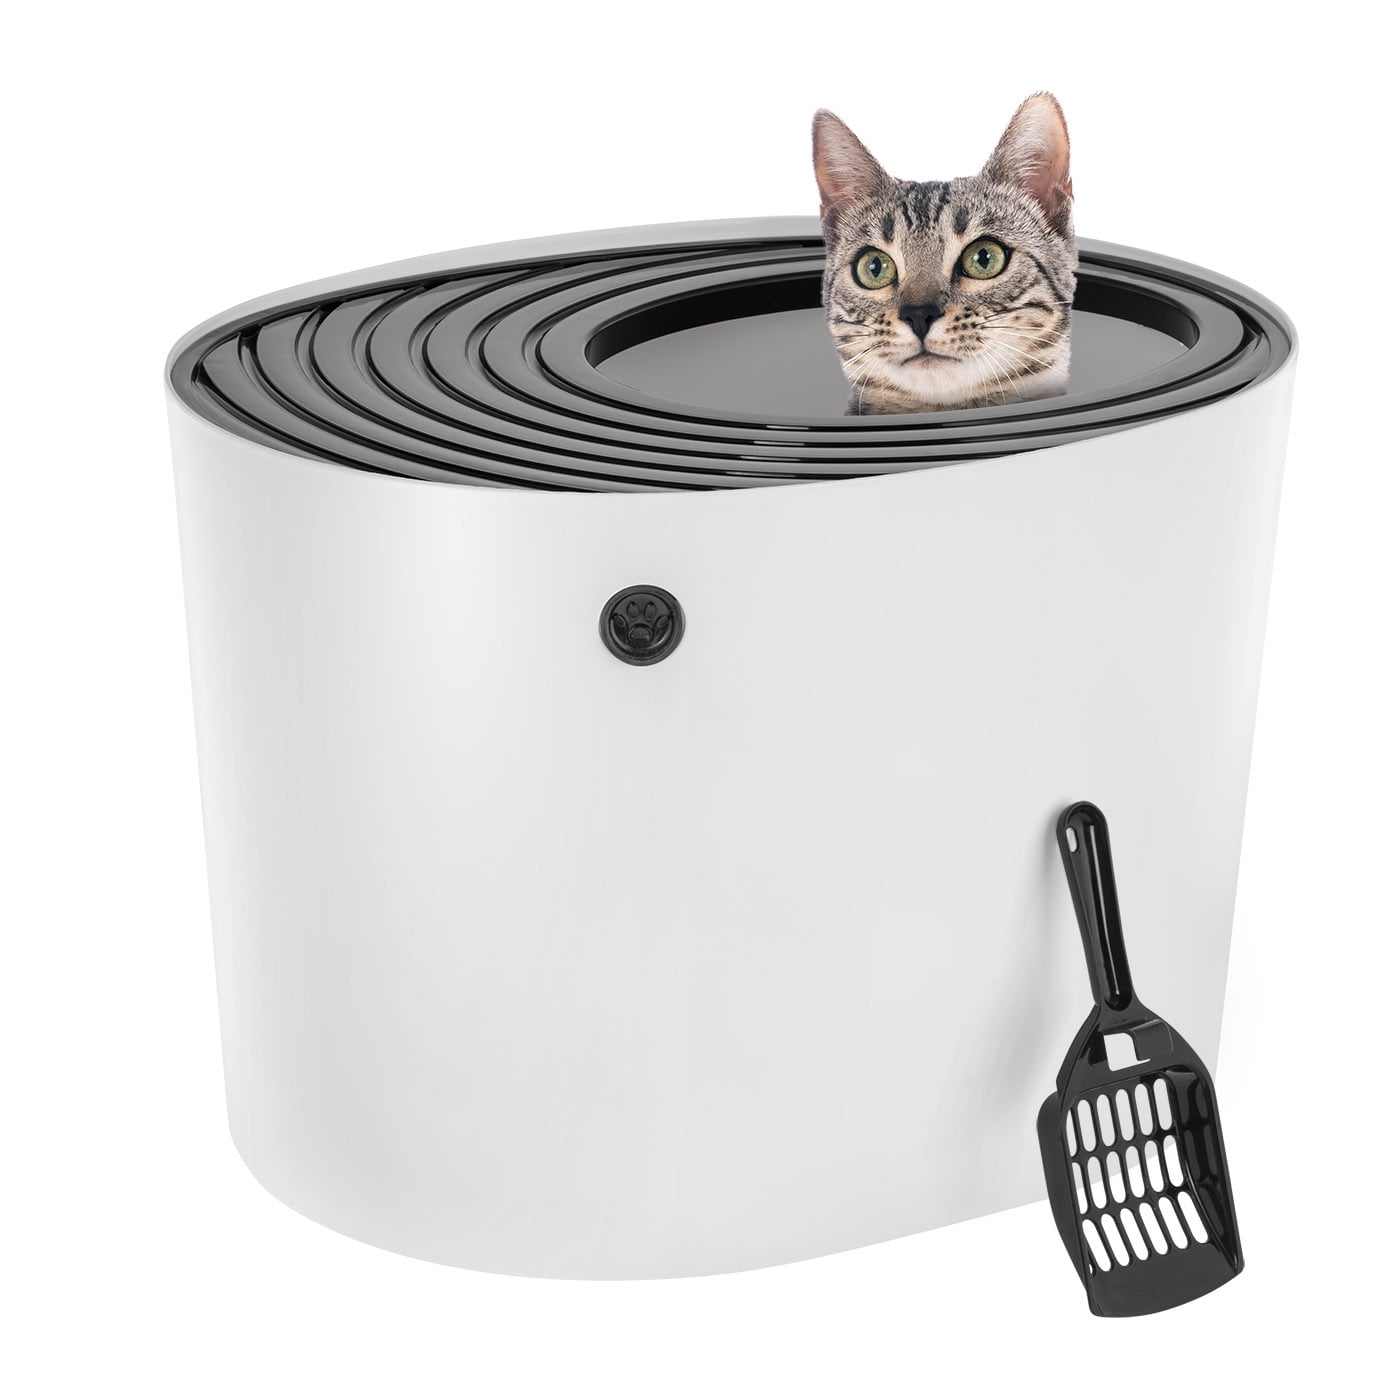 Large Pet Cat Toilet Litter Hooded Tray Box Loo Swing Door Portable Carry Handle 